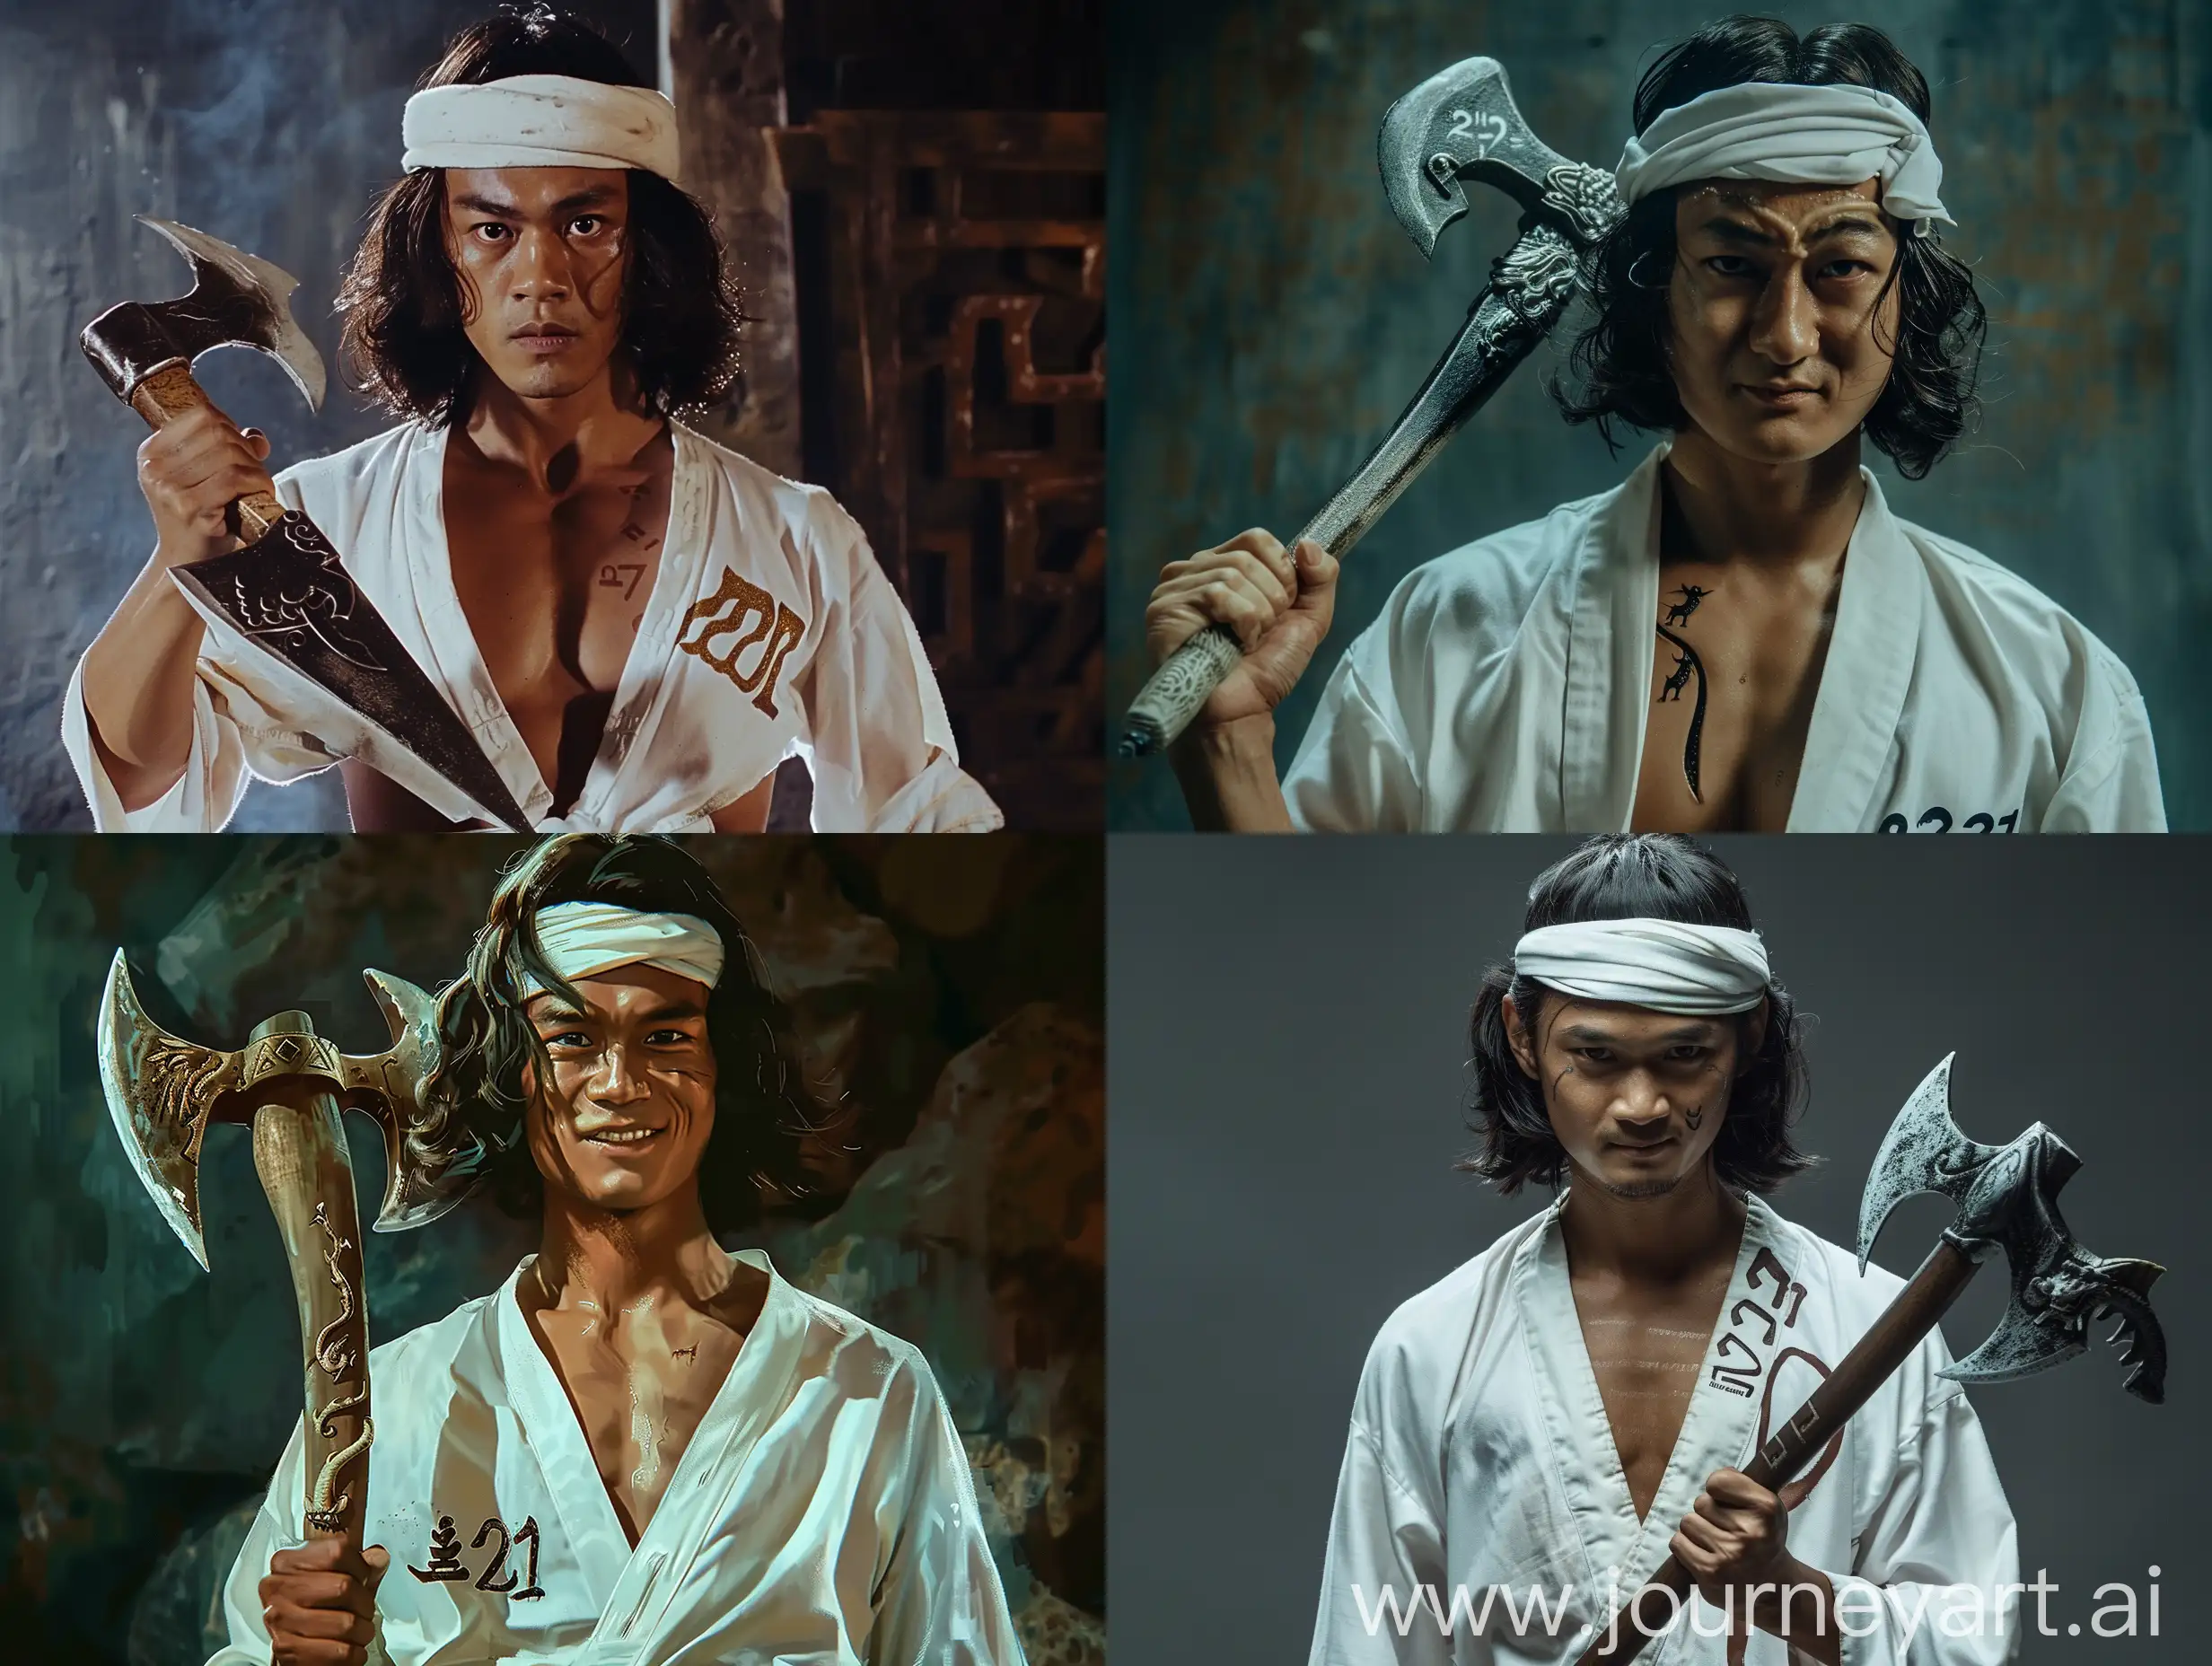 An Indonesian warrior, 25 years old, with a humorous face, shoulder-length black hair, a white headband, white shirt with his chest open in a v shape, on his chest is the writing "212", holding a short, double-edged ax with a dragon-shaped handle. movie style, full body shot.